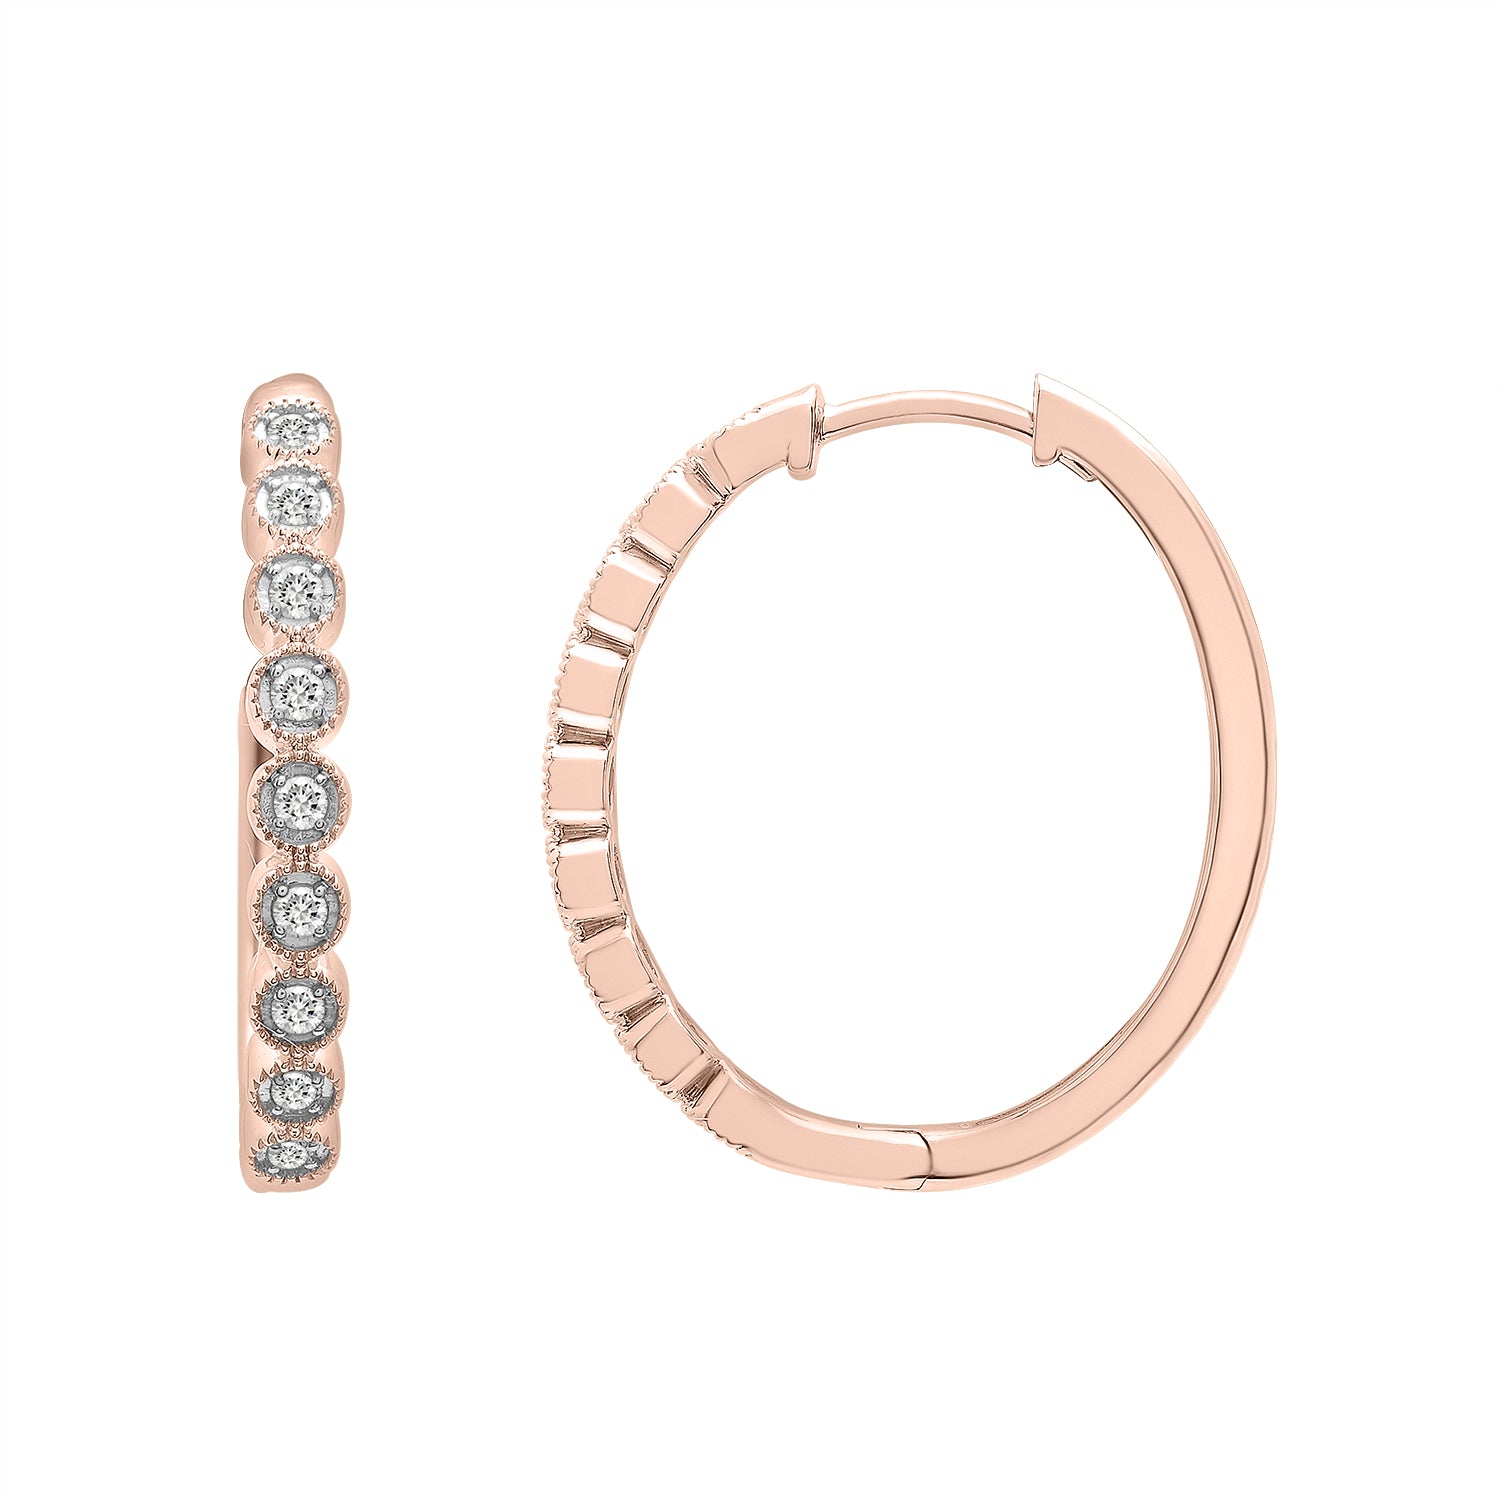 Elise Diamond Dot Hoop Earrings In Rose Gold with Different View